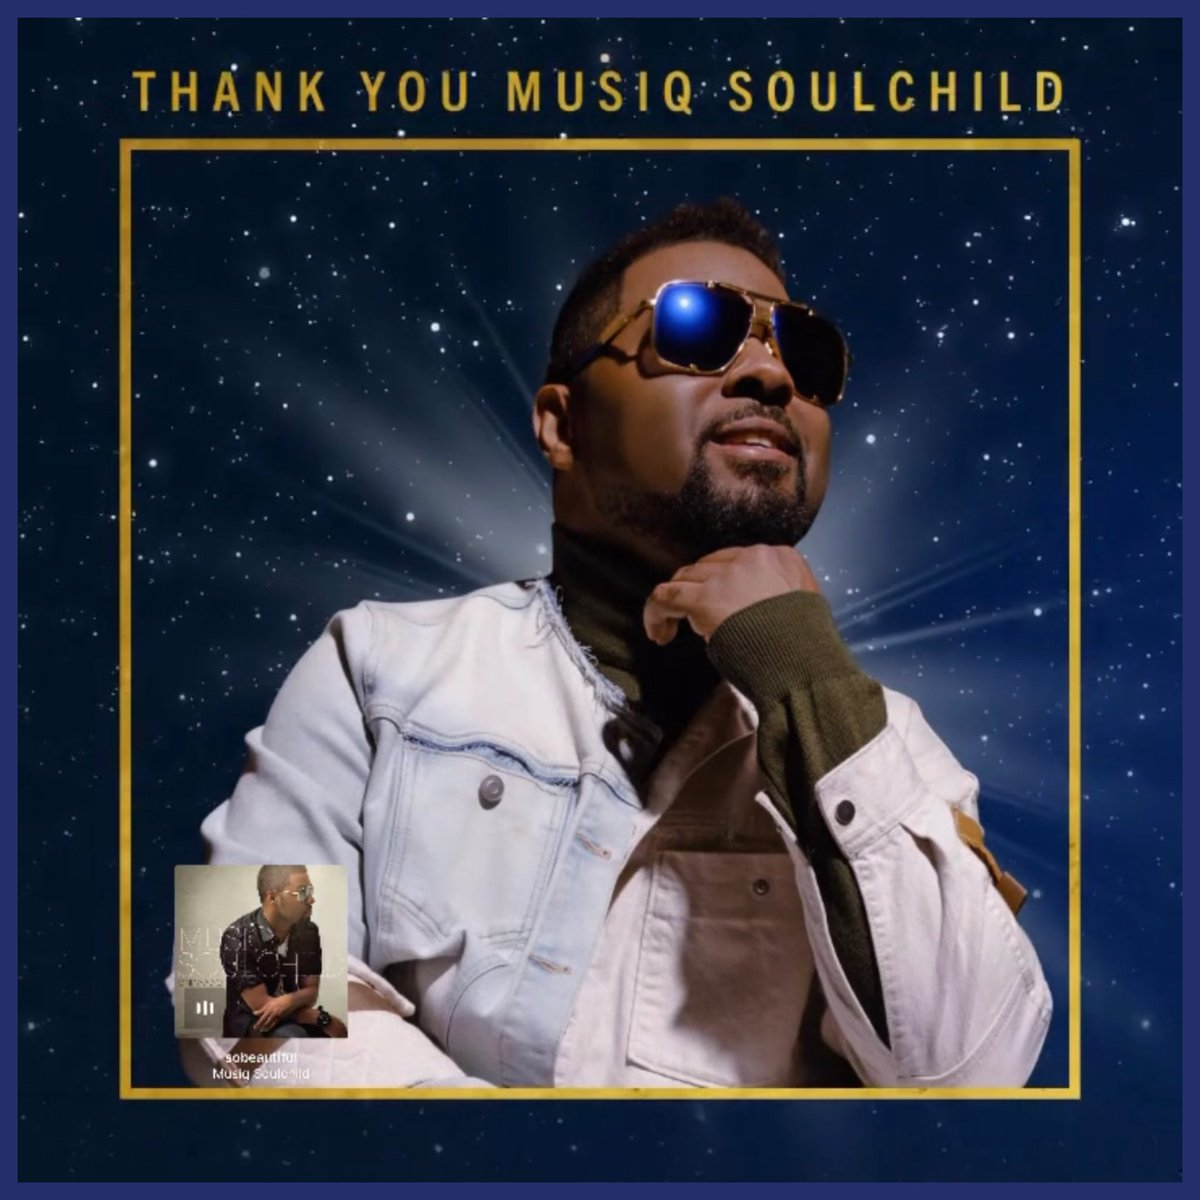 THE NIGHT TOUR PART TWO . . . @musiqsoulchild is effortless soul